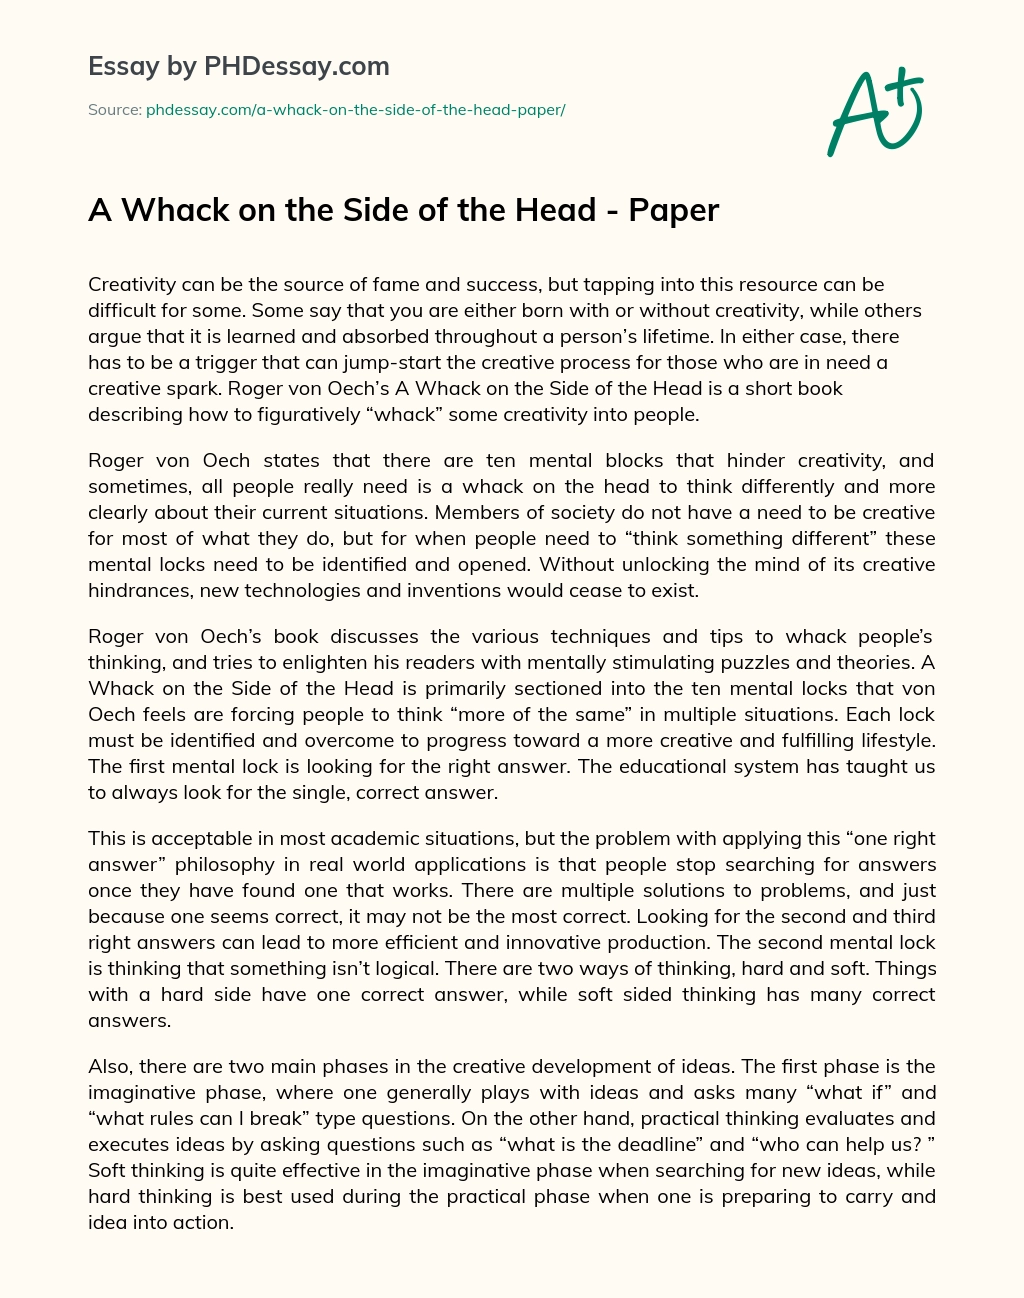 A Whack on the Side of the Head – Paper essay